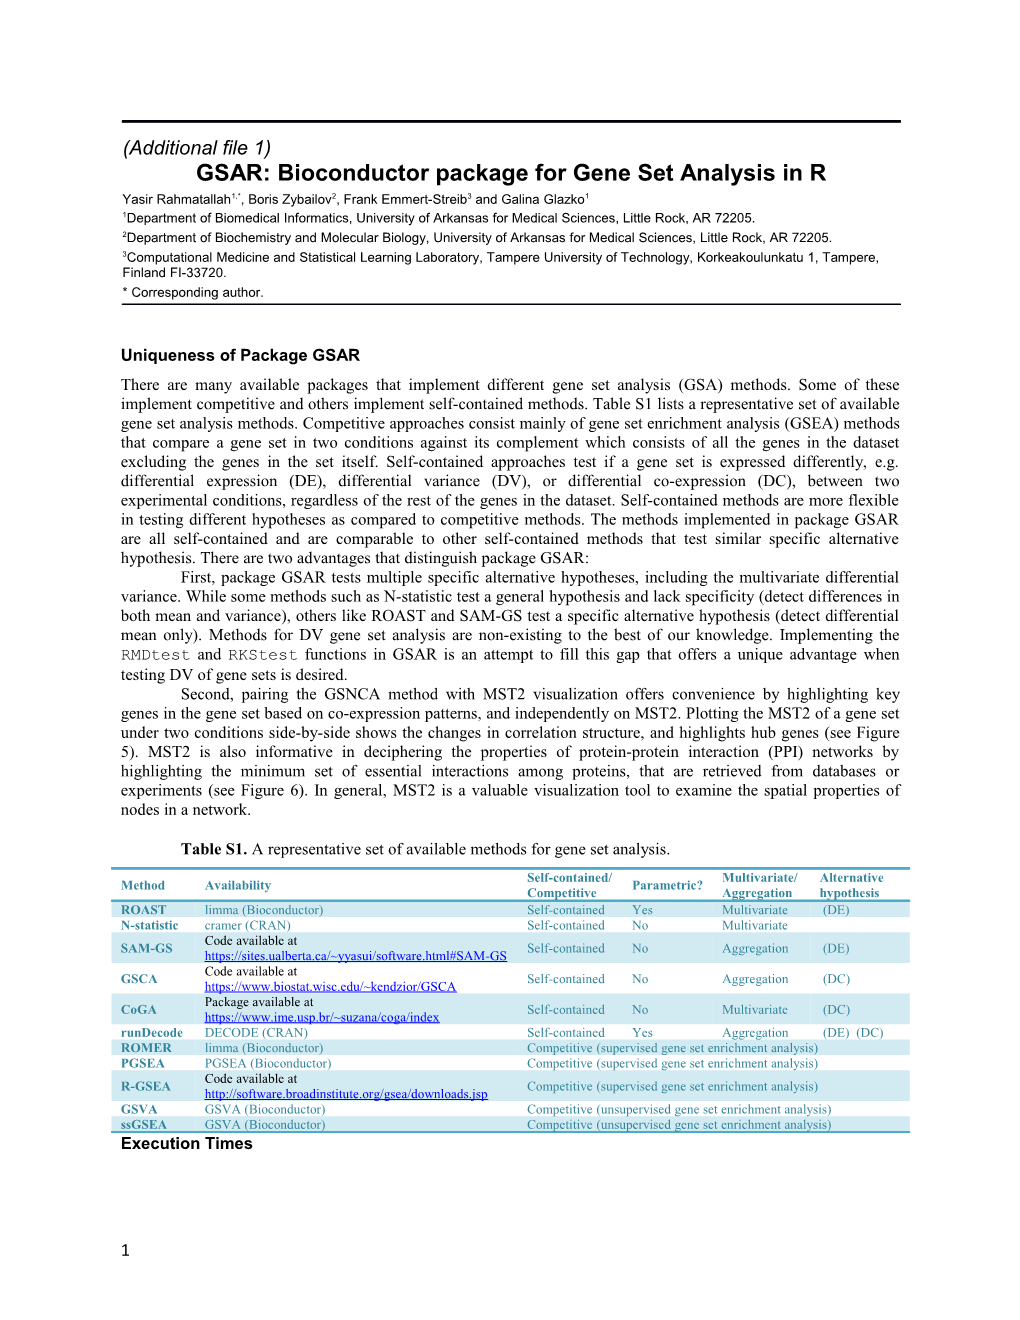 Uniqueness of Package GSAR